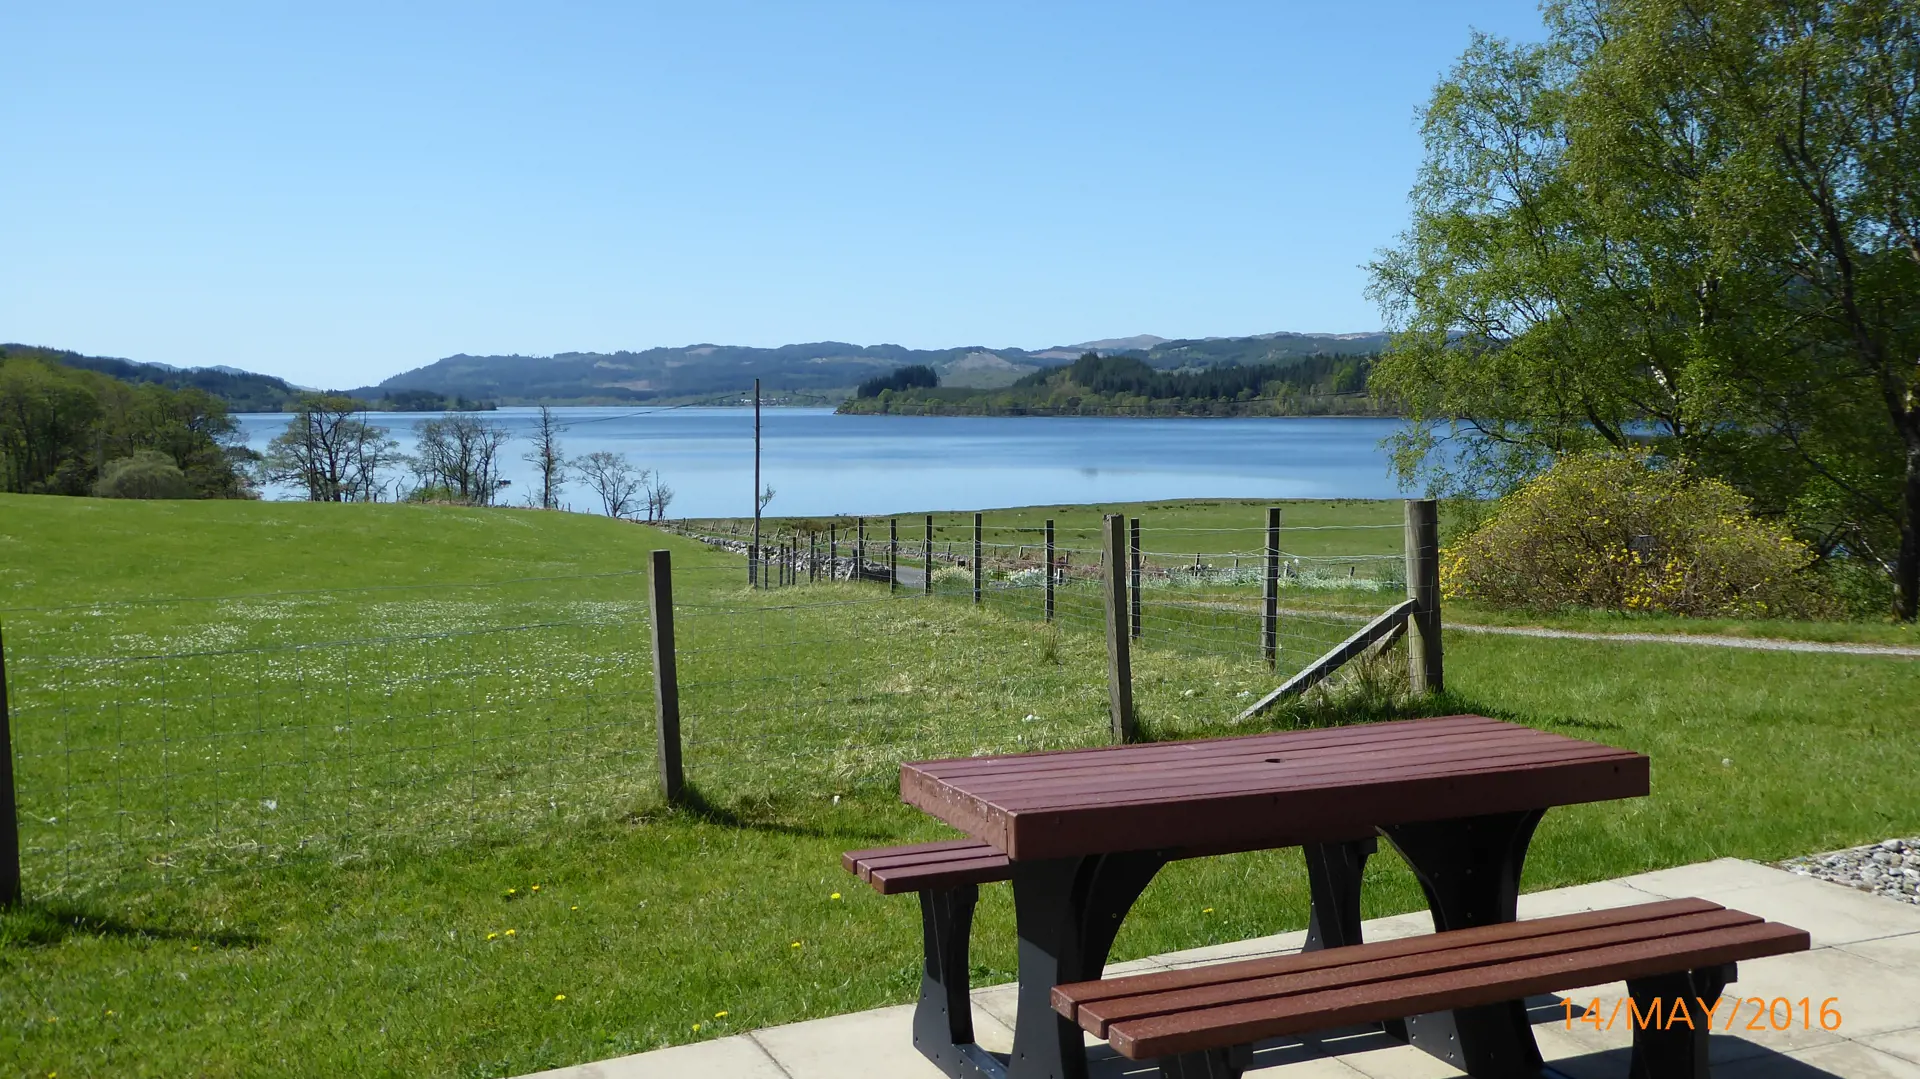 barr-beithe-lower-picnic-table-and-loch-awe.jpg